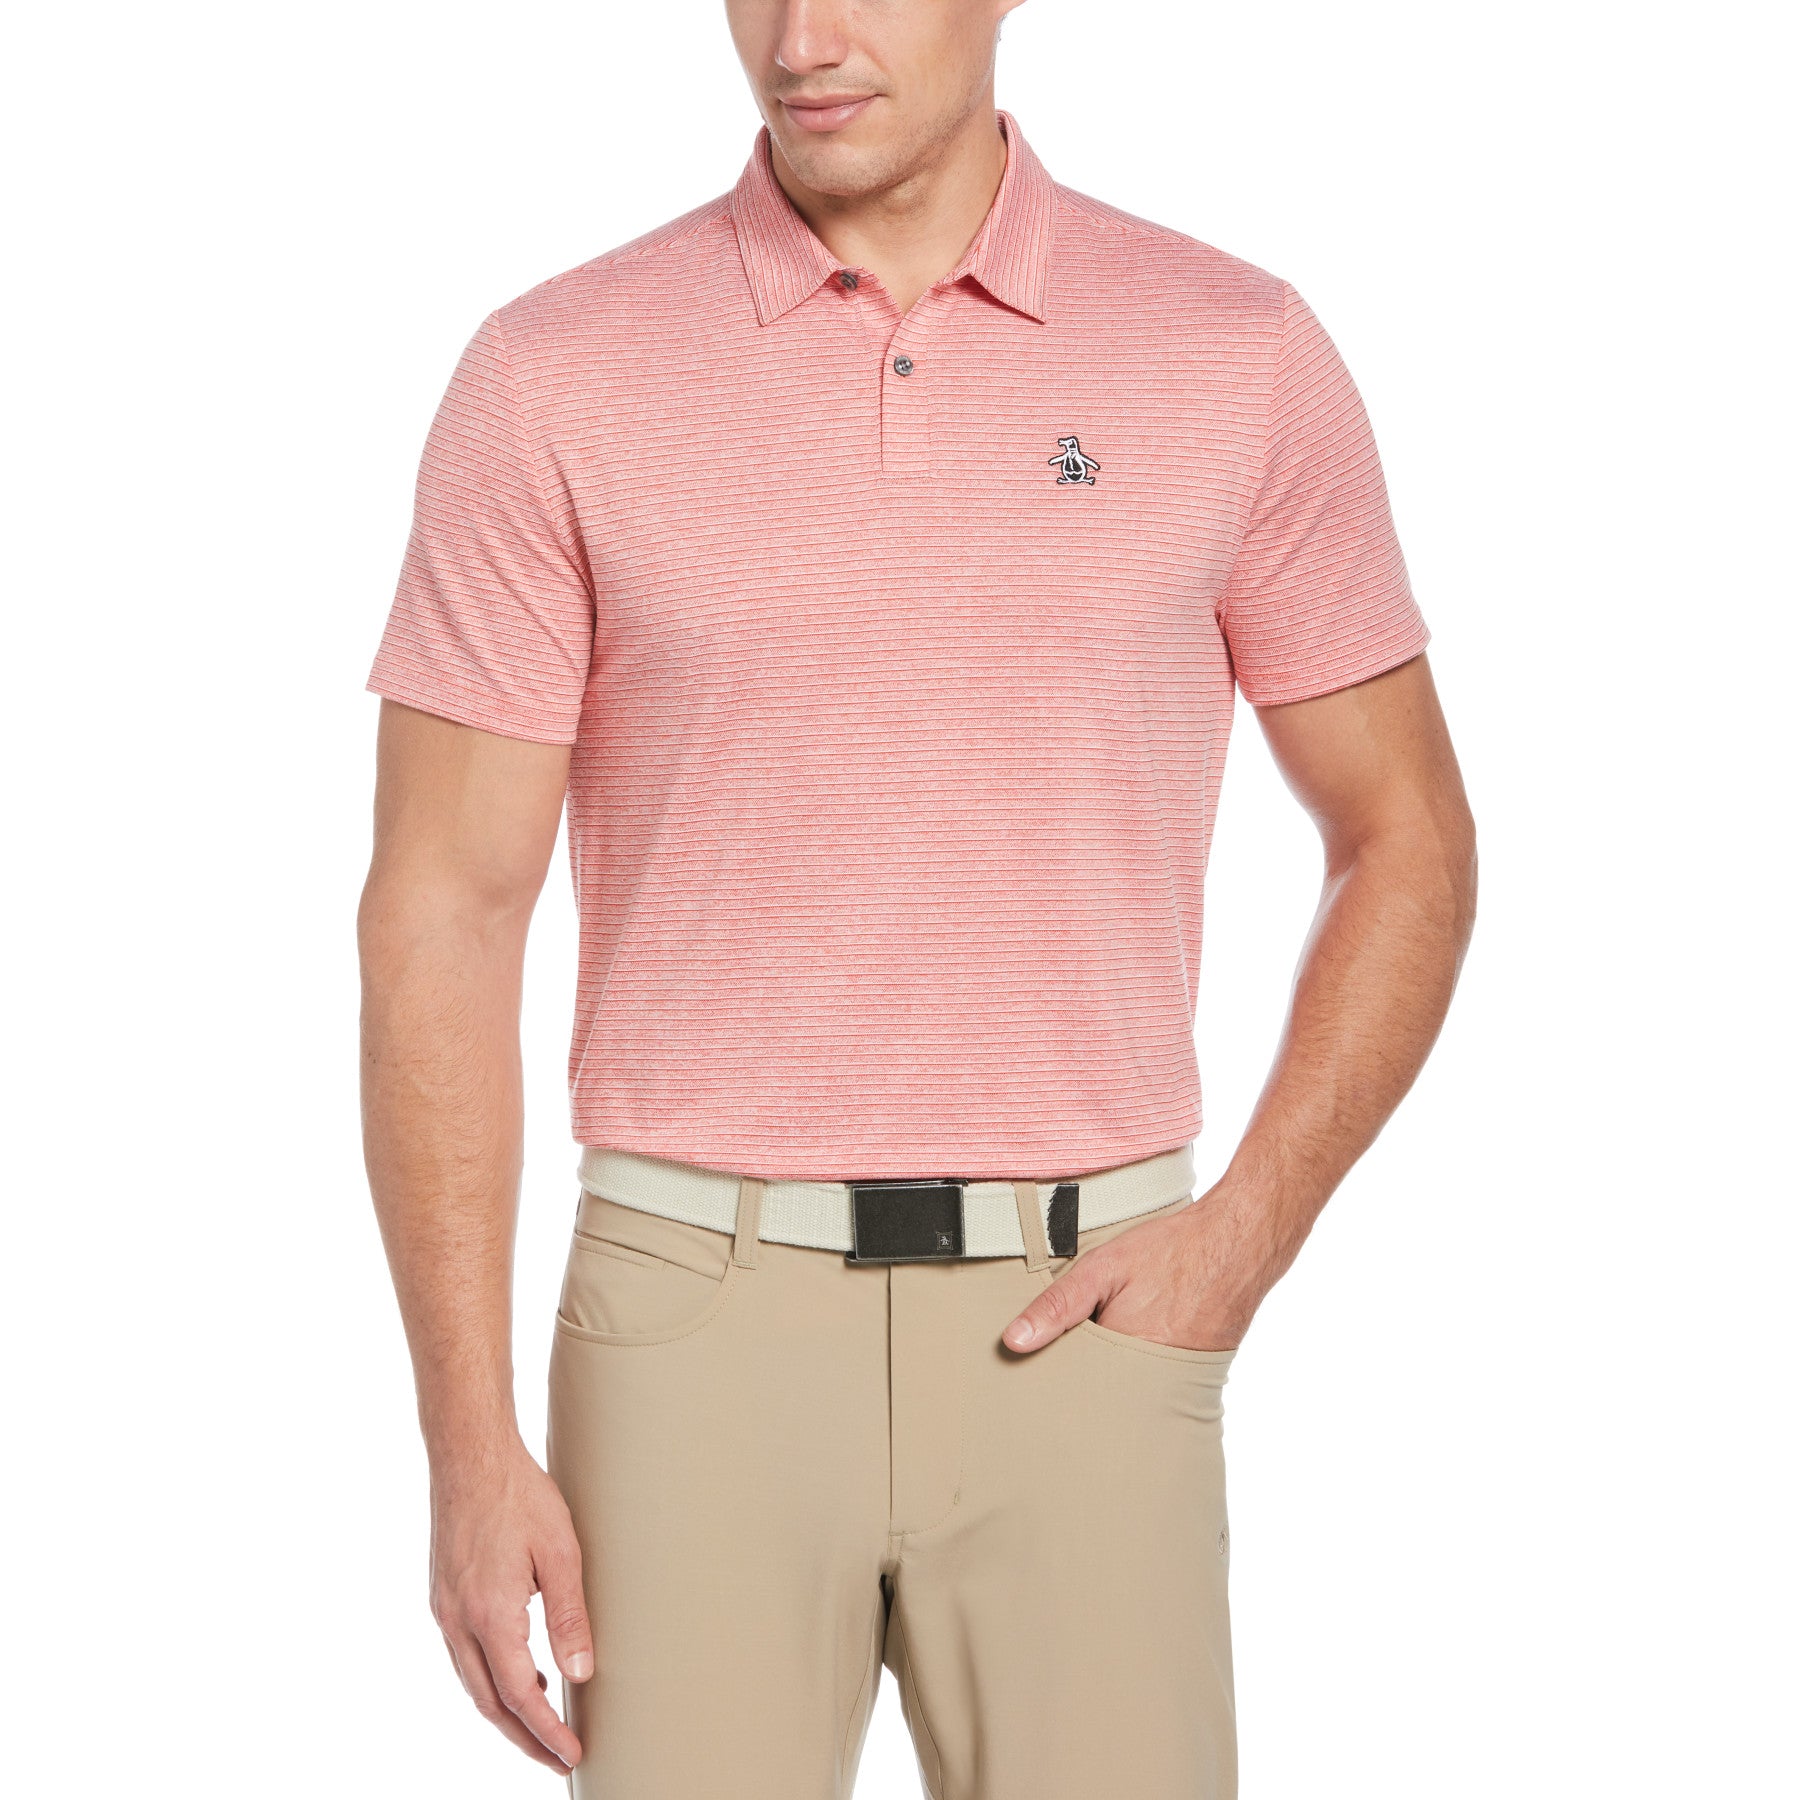 View The Original Stripe Golf Polo Shirt In Bittersweet information